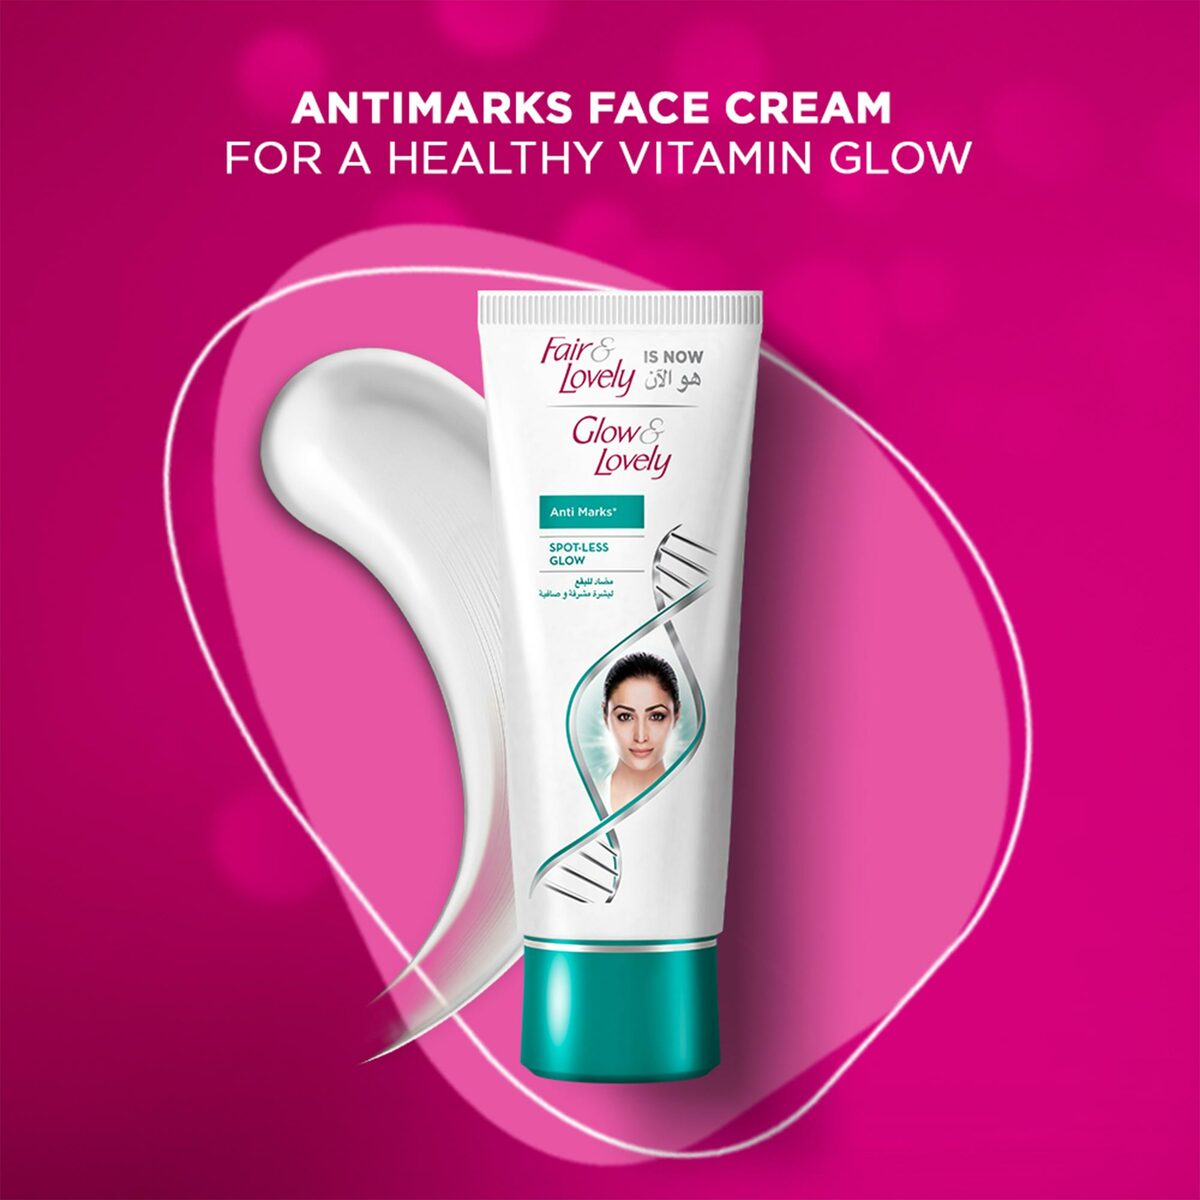 Glow & Lovely Face Cream Anti-Marks Spot-Less Glow 100g